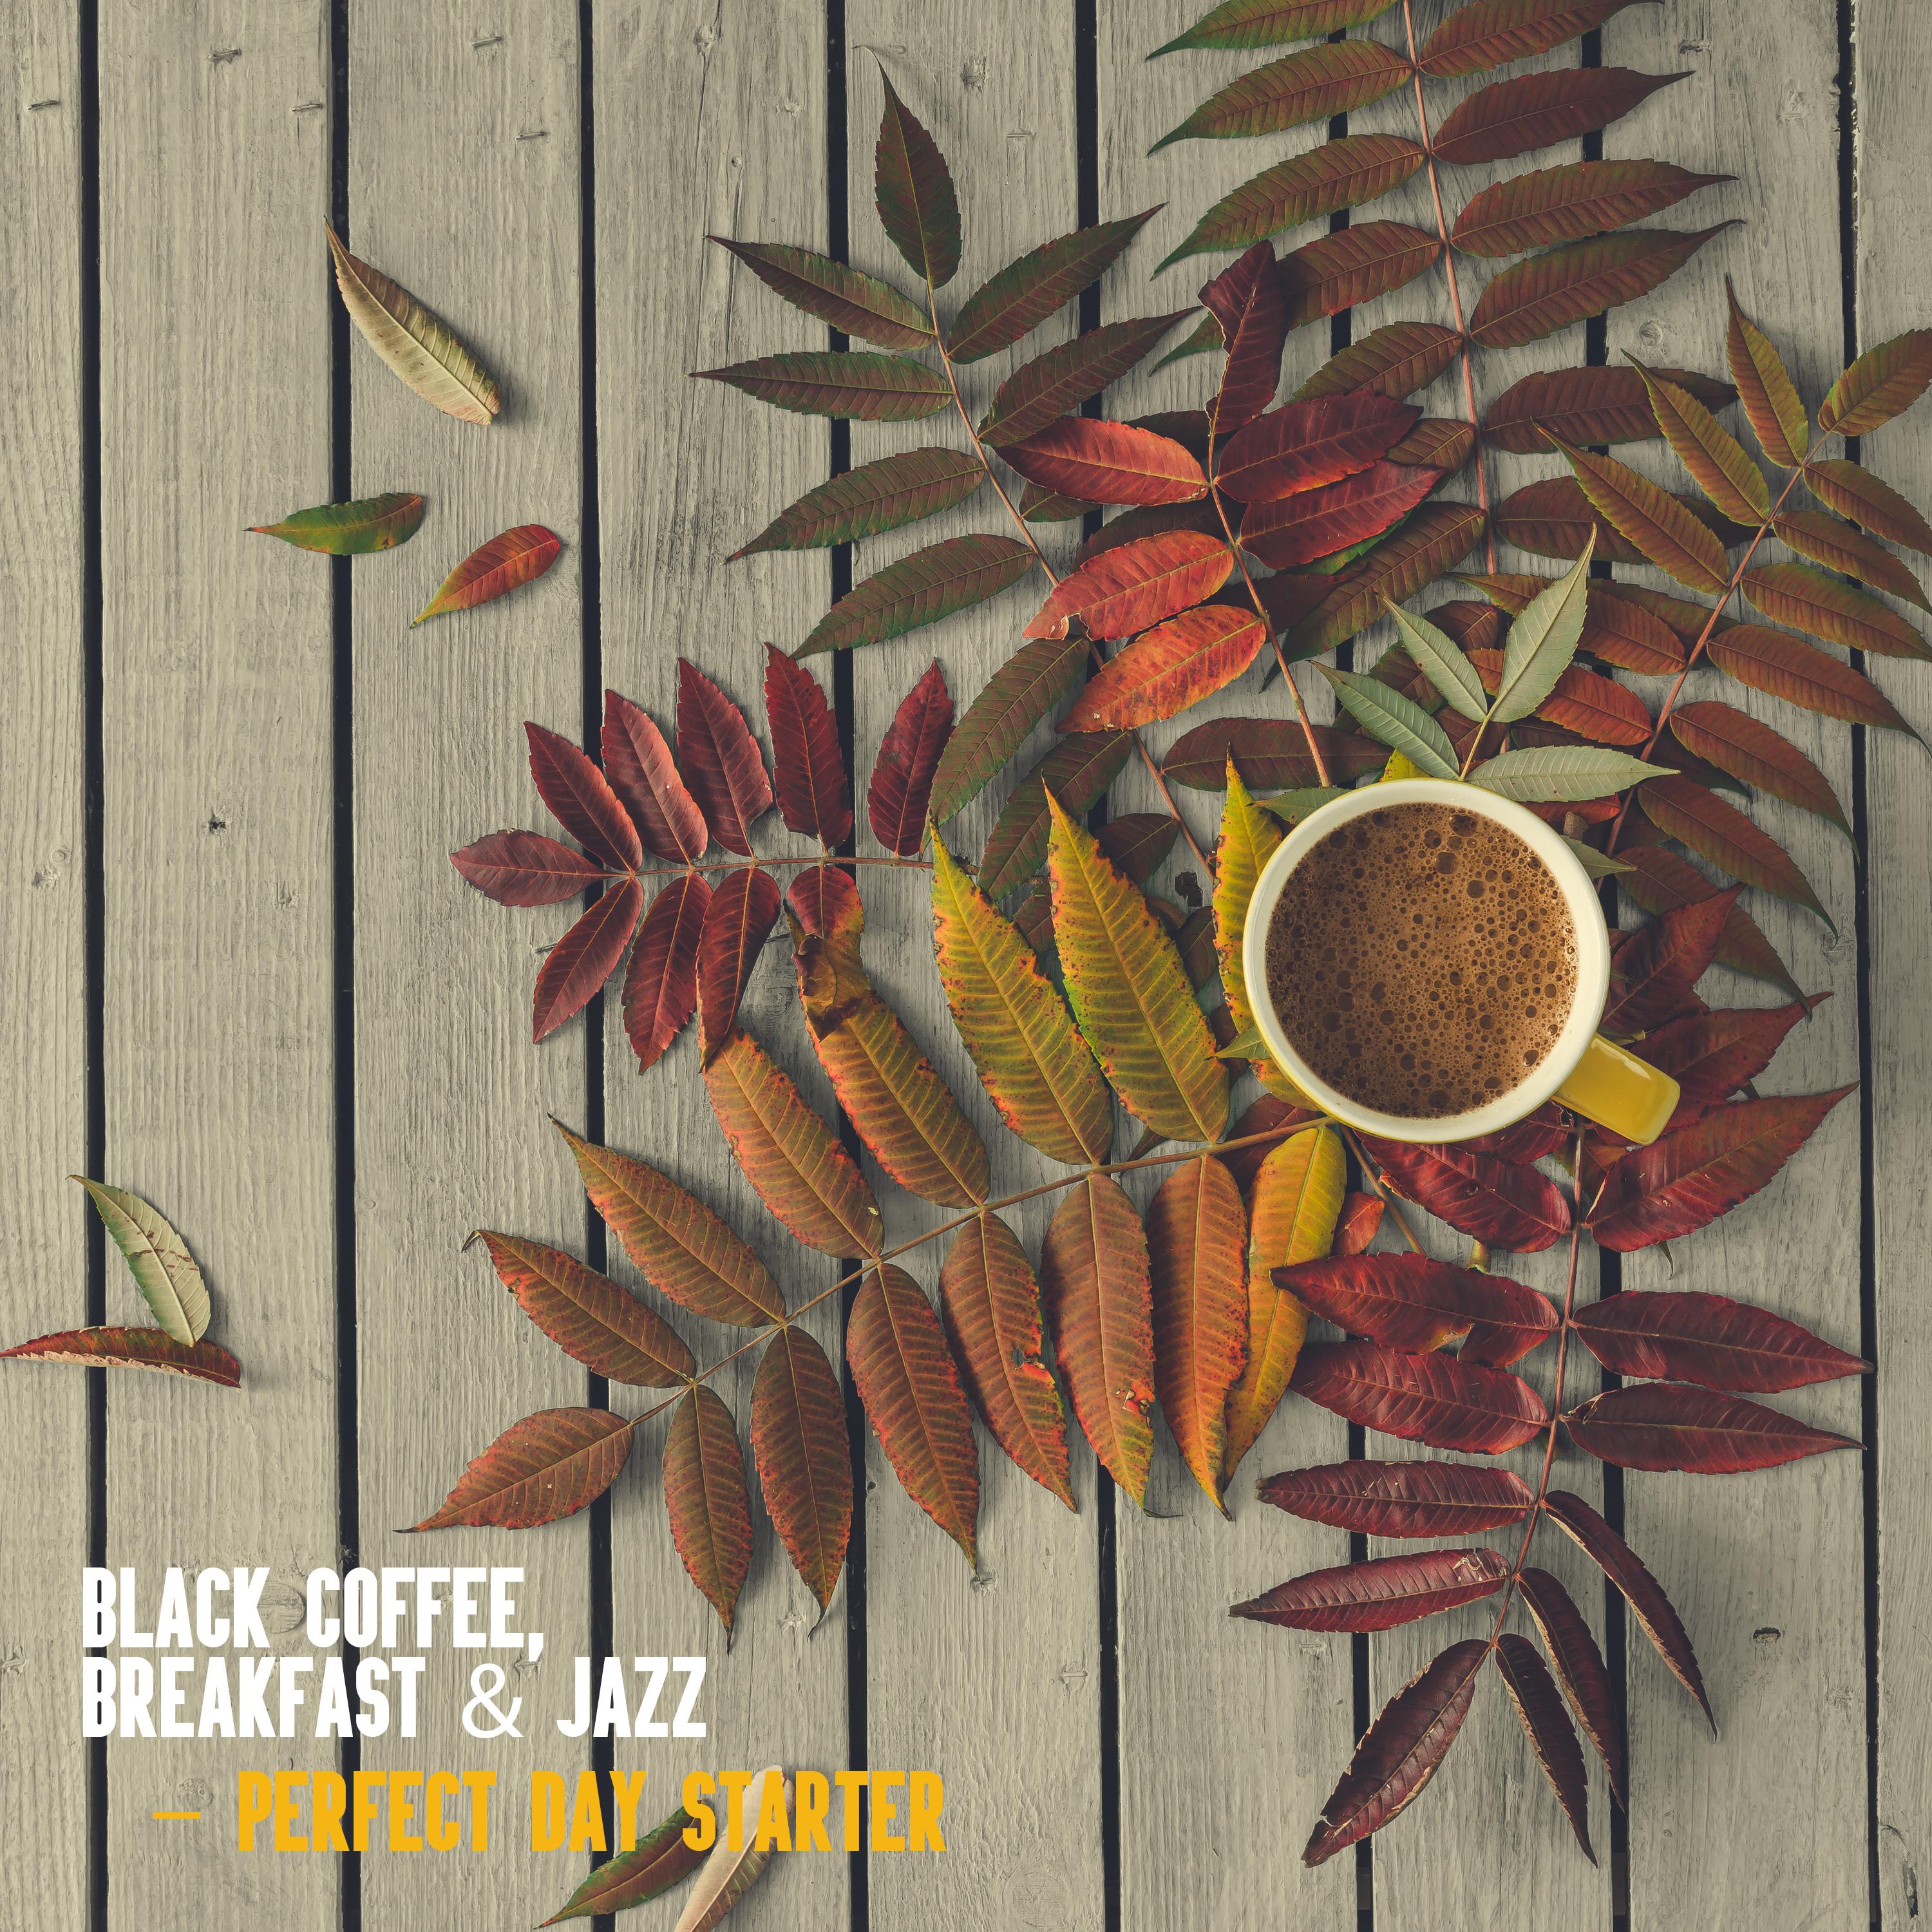 Black Coffee, Breakfast & Jazz – Perfect Day Starter: 2019 Compilation of Best Smooth Instrumental Jazz Music for Perfect Start a Day, Increase the Level of Endorphins, Be Happy & Full of Energy